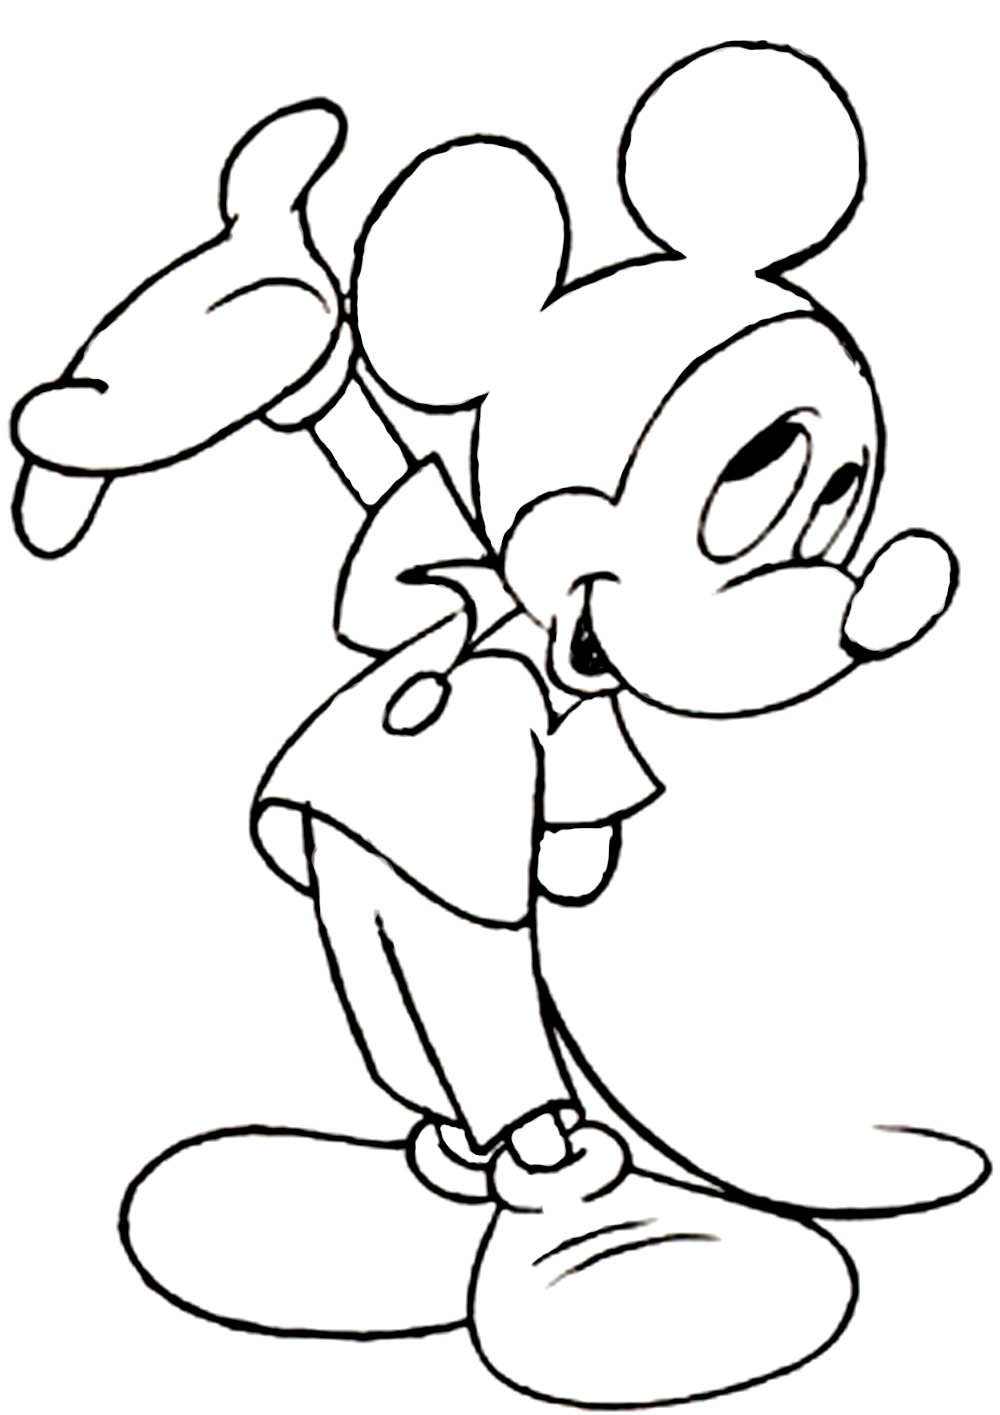 black and white mouse clipart free - photo #13